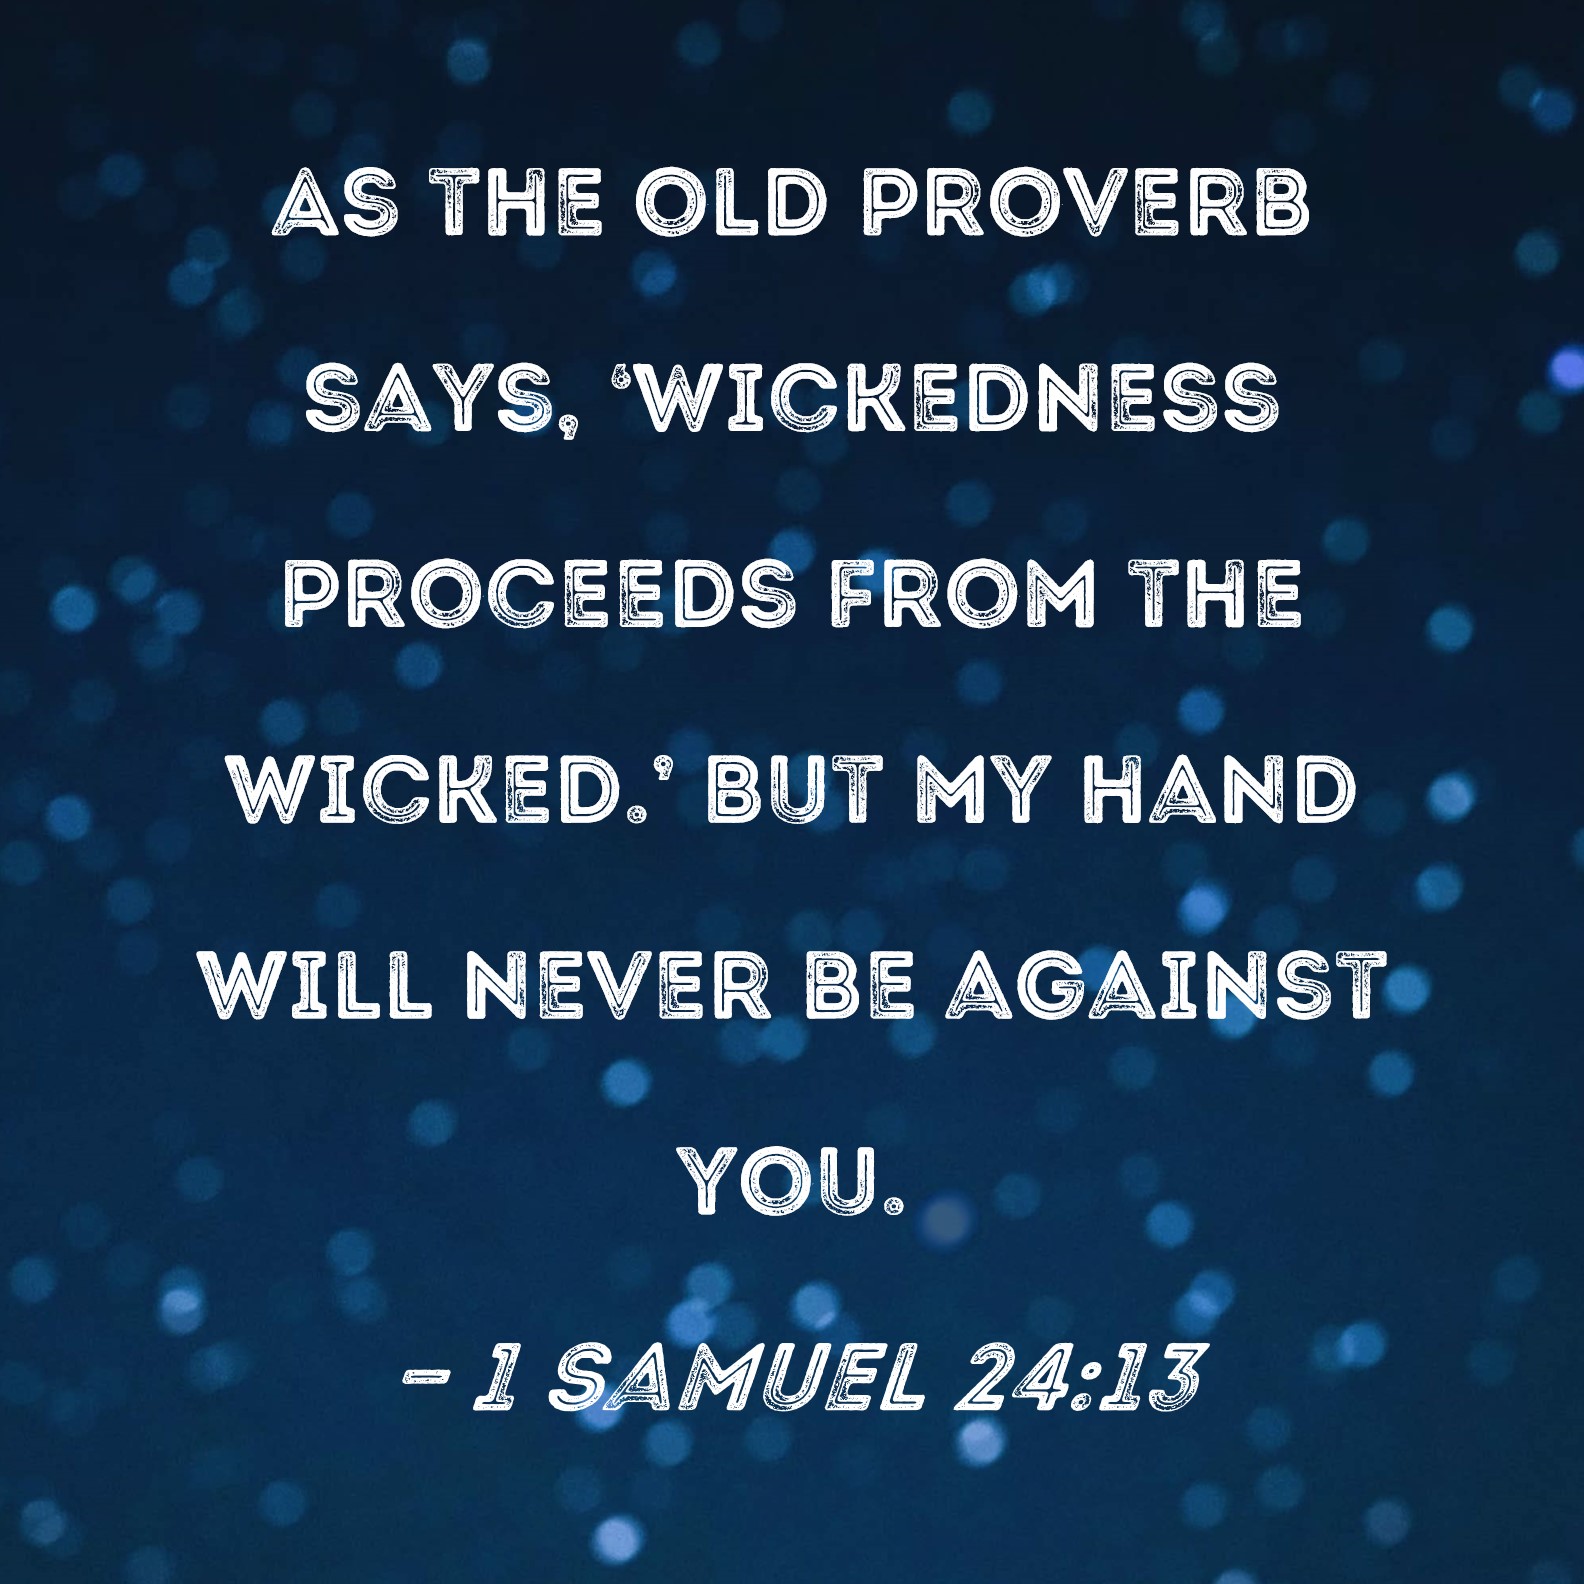 1 Samuel 24:13 As the old proverb says, 'Wickedness proceeds from